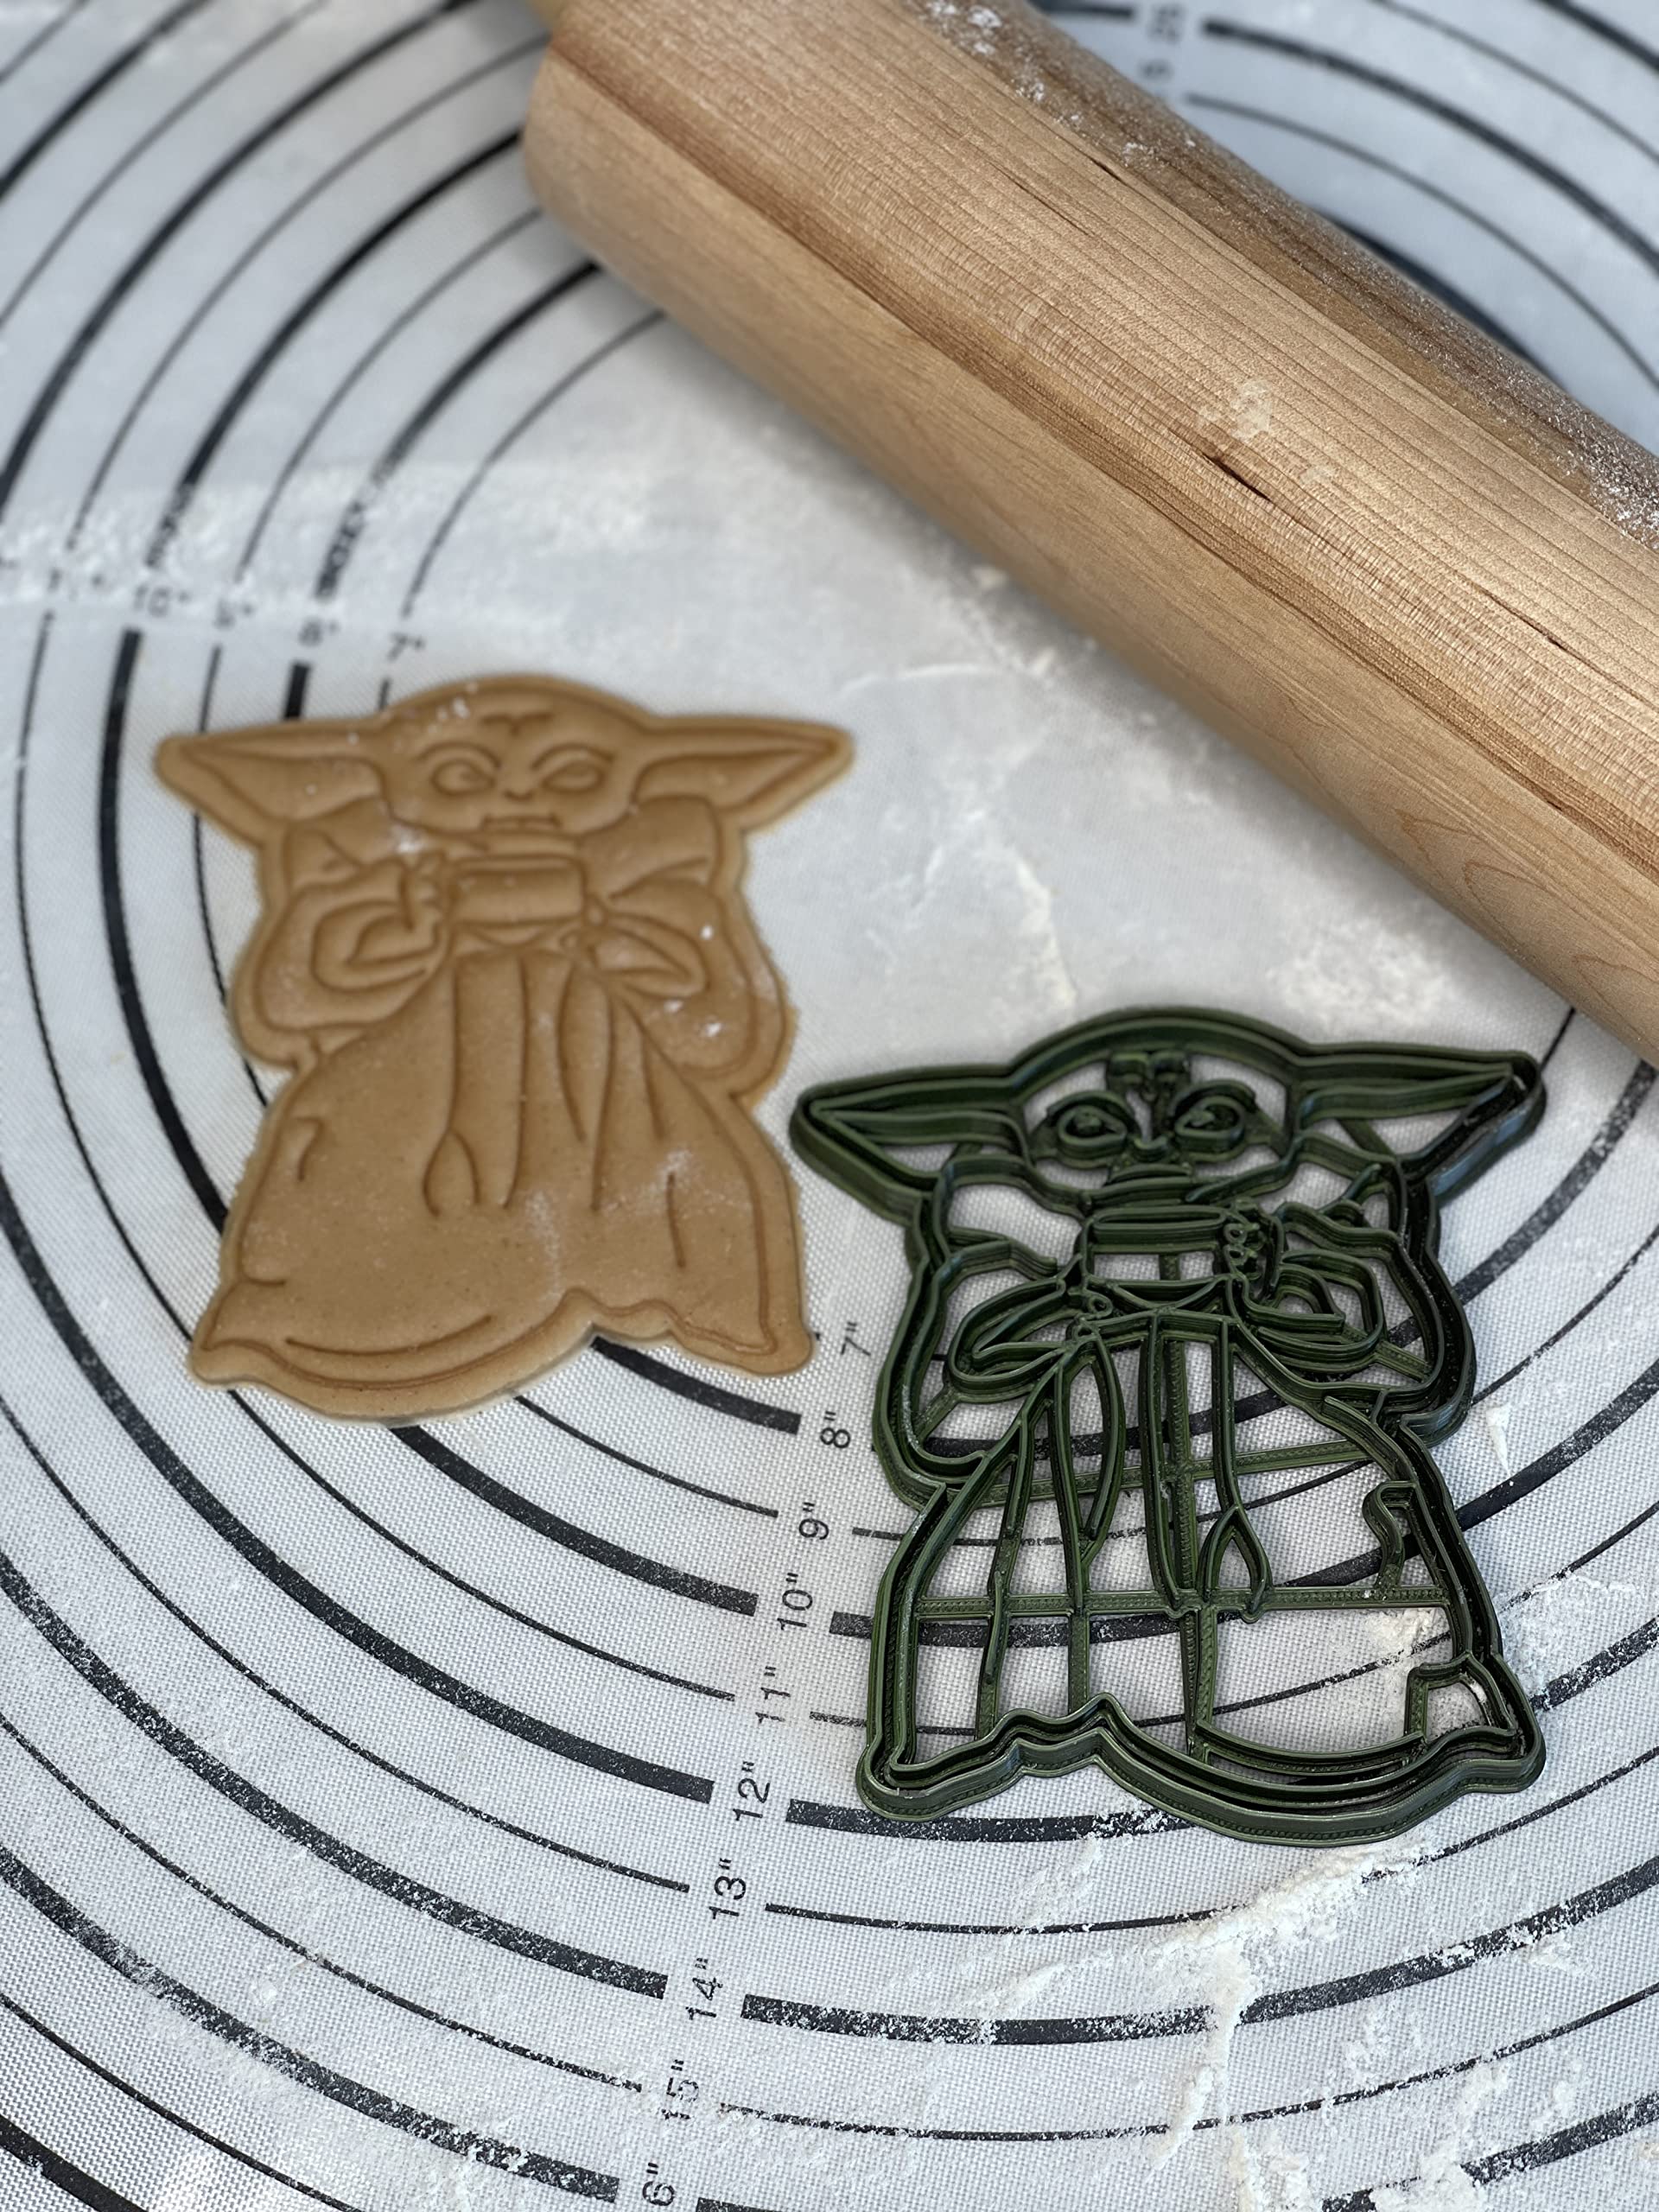 Premium Star Wars Exclusive The Mandalorian Baby Yoda Grogu With Soup Bowl Cookie Cutter Mold 4-Inch-Scale Produced by 3D Kitchen Art